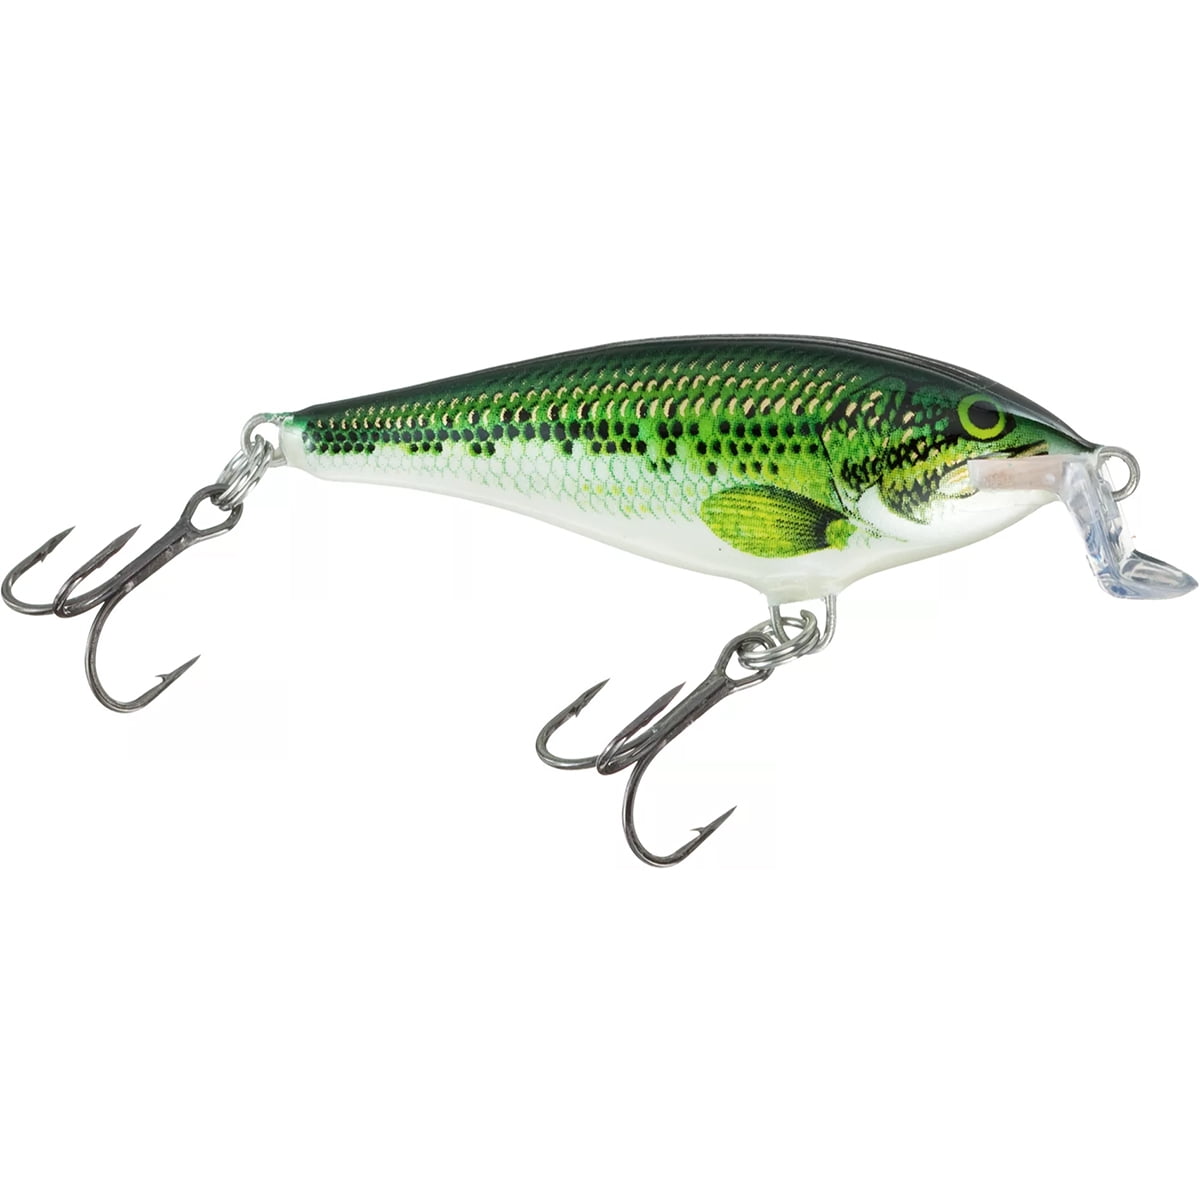  Rapala Jointed 11 Fishing lure (Firetiger, Size- 4.375) :  Fishing Topwater Lures And Crankbaits : Sports & Outdoors